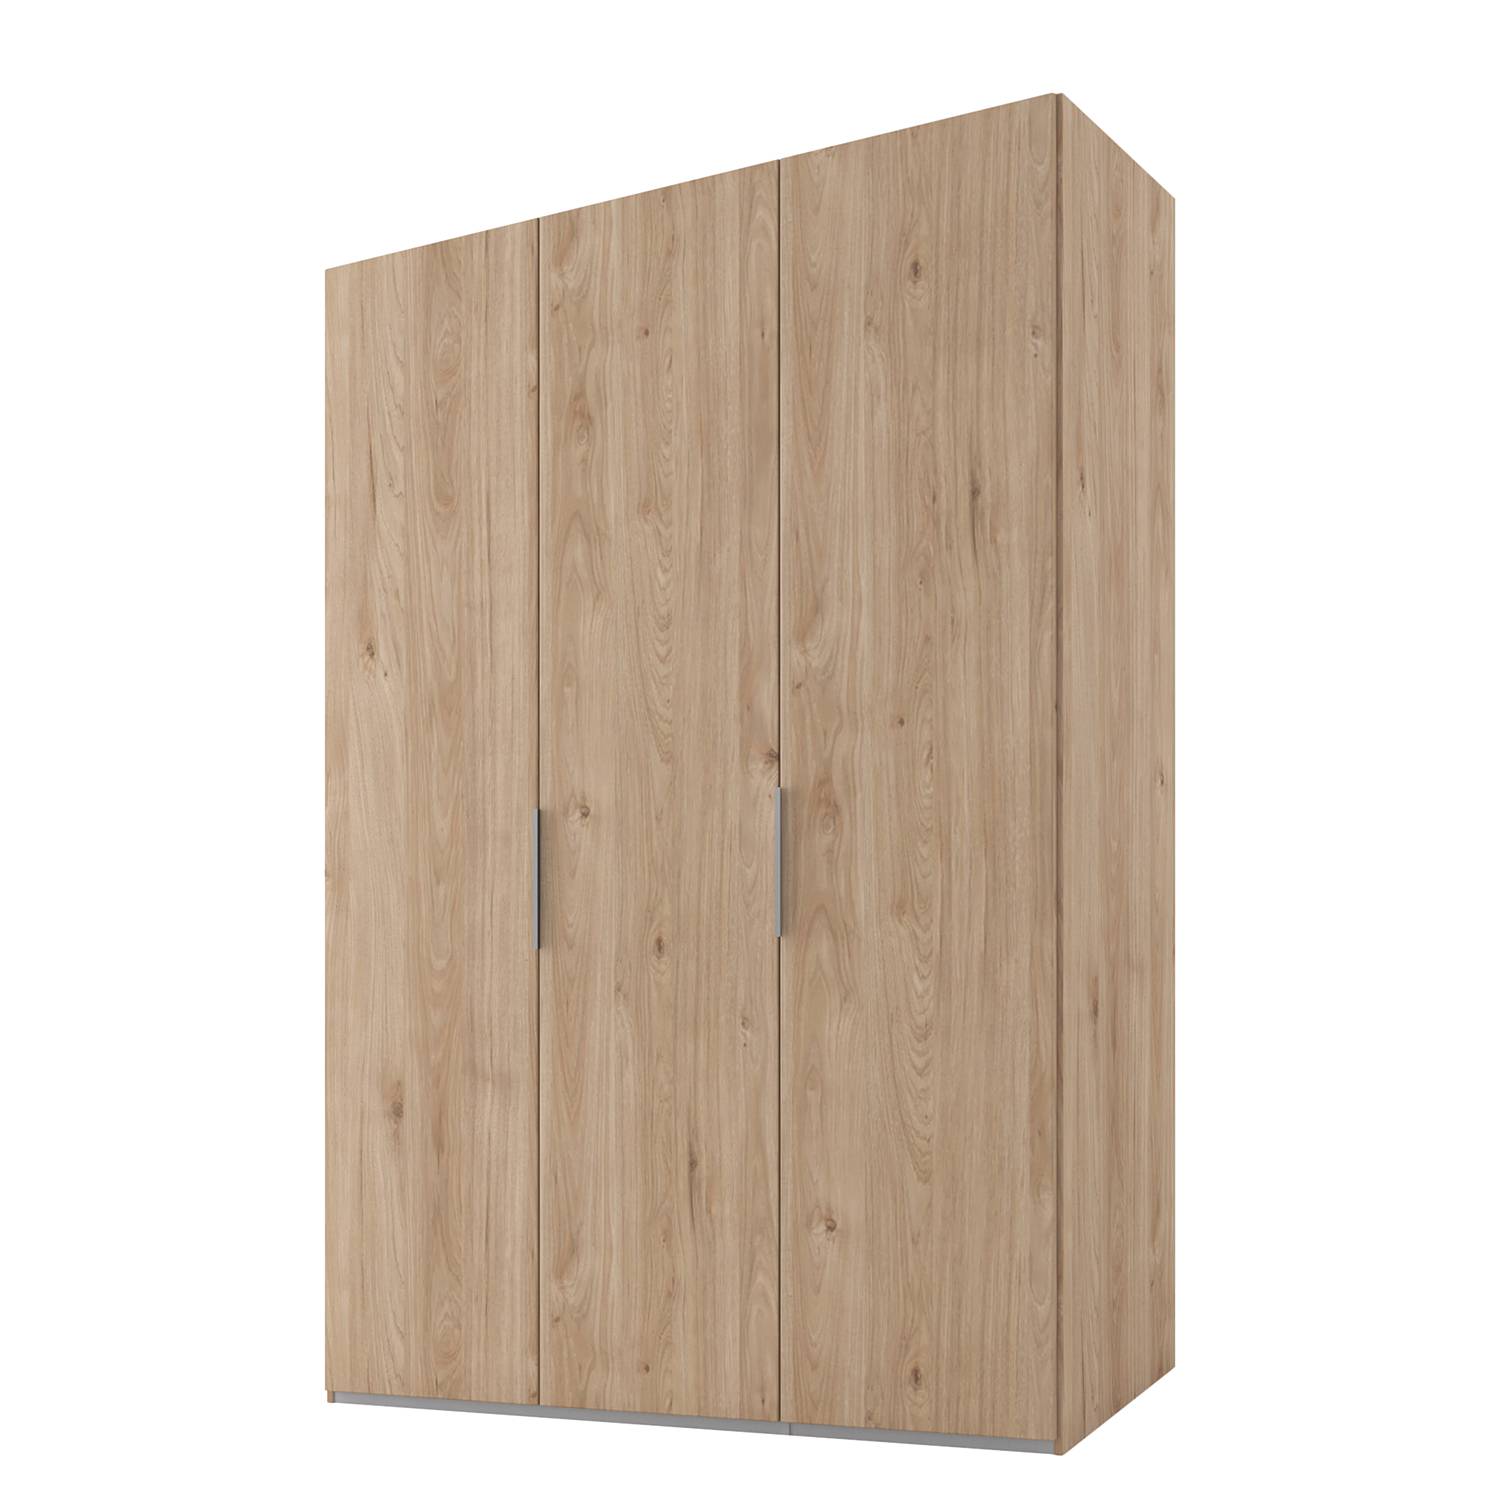 Image of Armoire One 210 000000001000224453